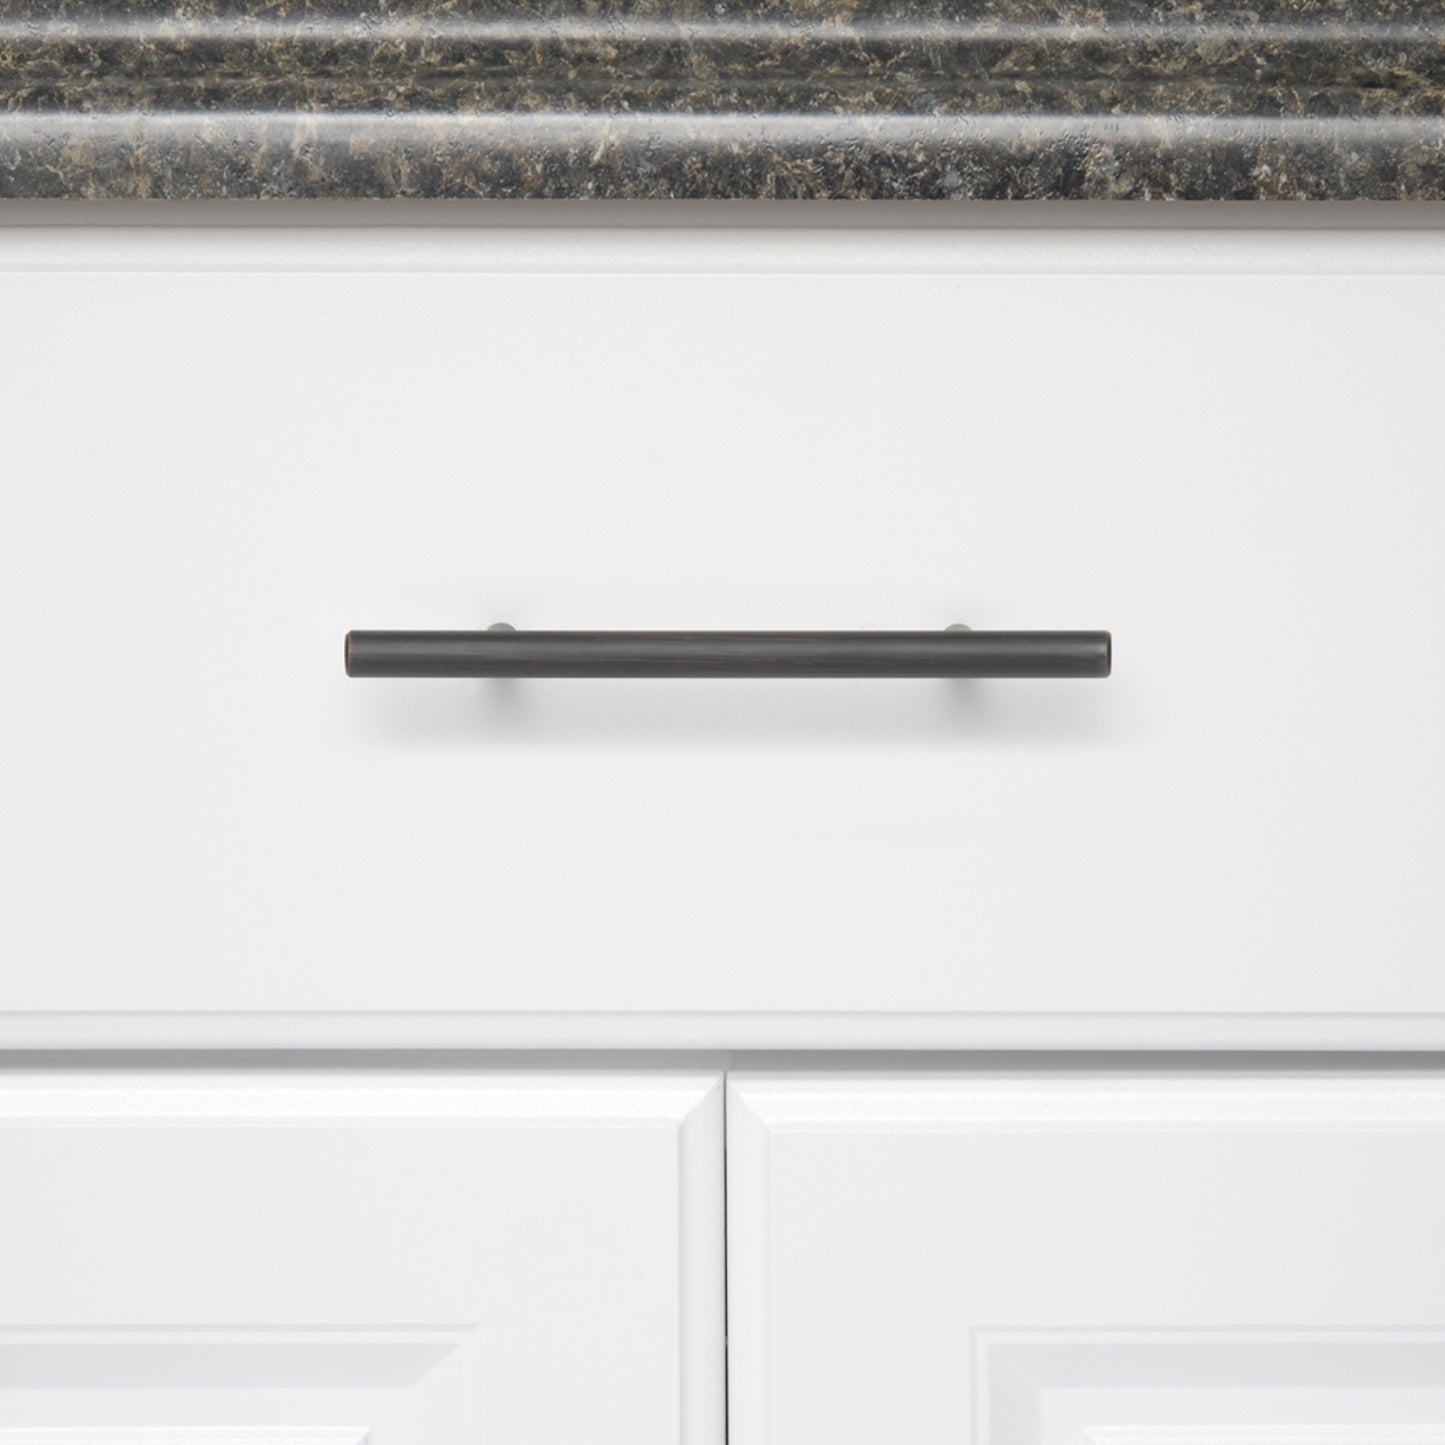 South Main Hardware Euro Bar Cabinet Handle (3/8" Diameter), 6.13" Length (3.75" Hole Center), Oil Rubbed Bronze, 10-Pack